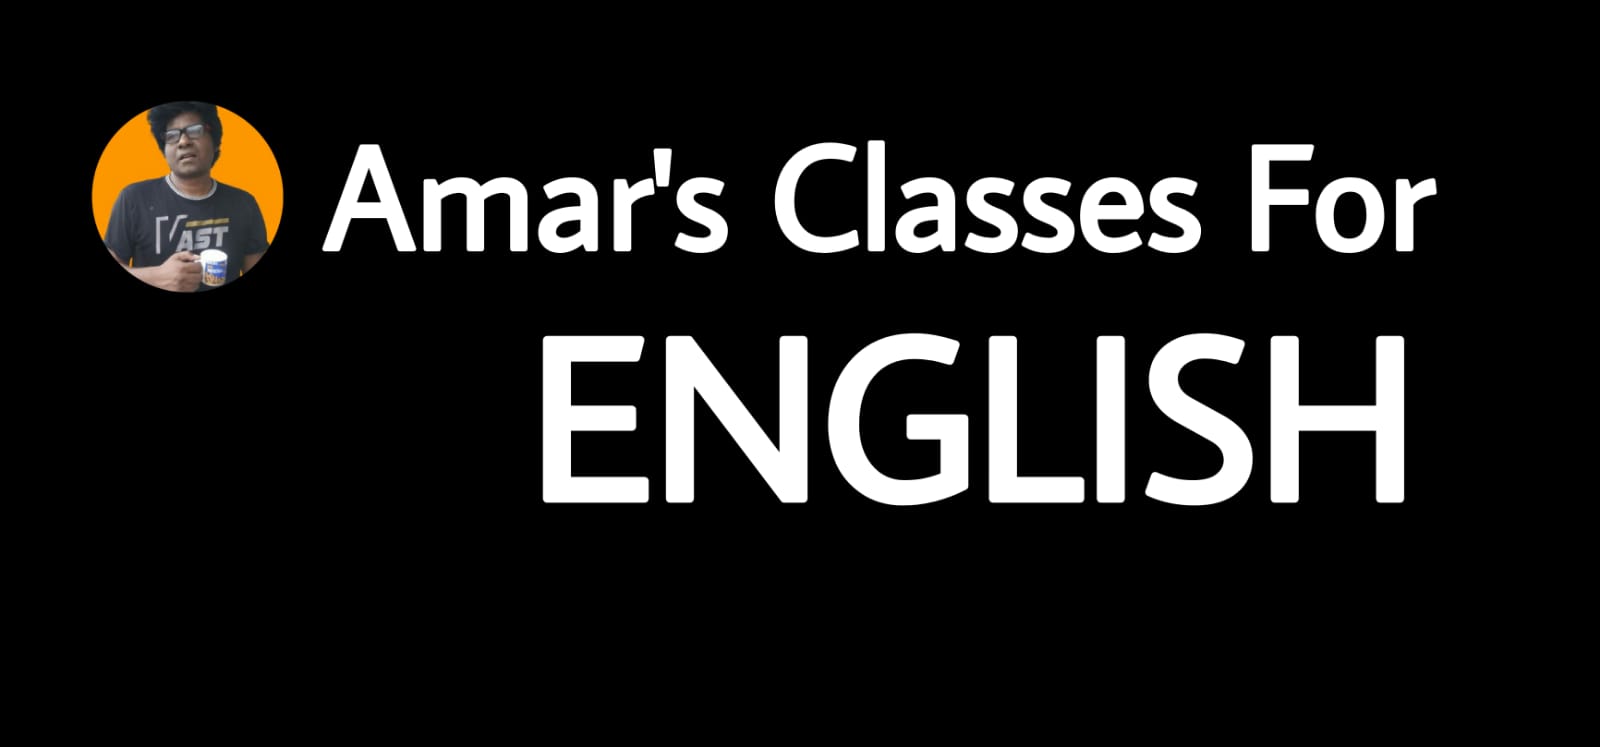 Amar's Classes For English